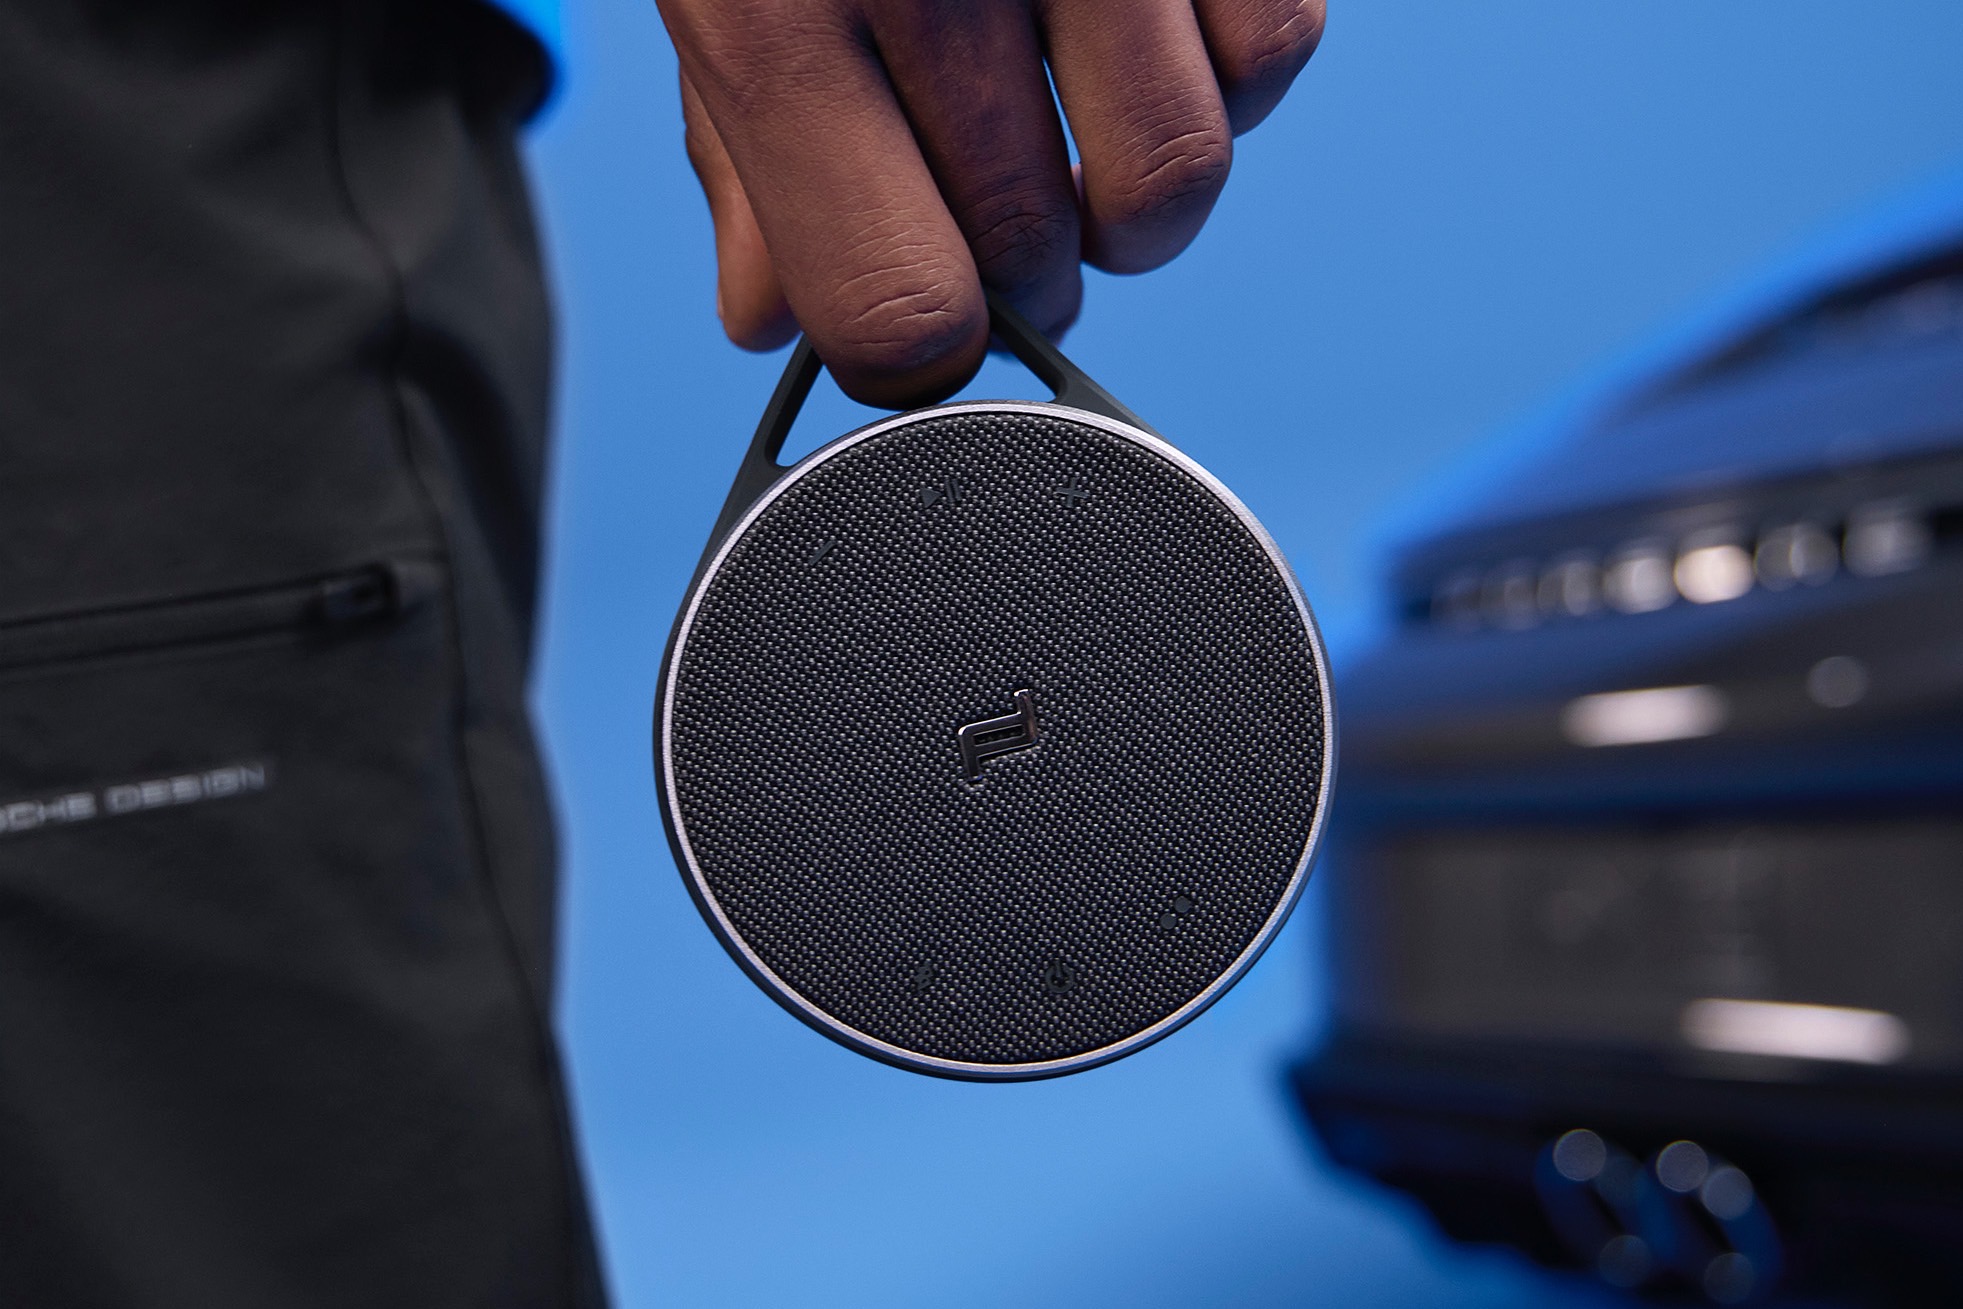 Guess how much this tiny Porsche Design speaker costs